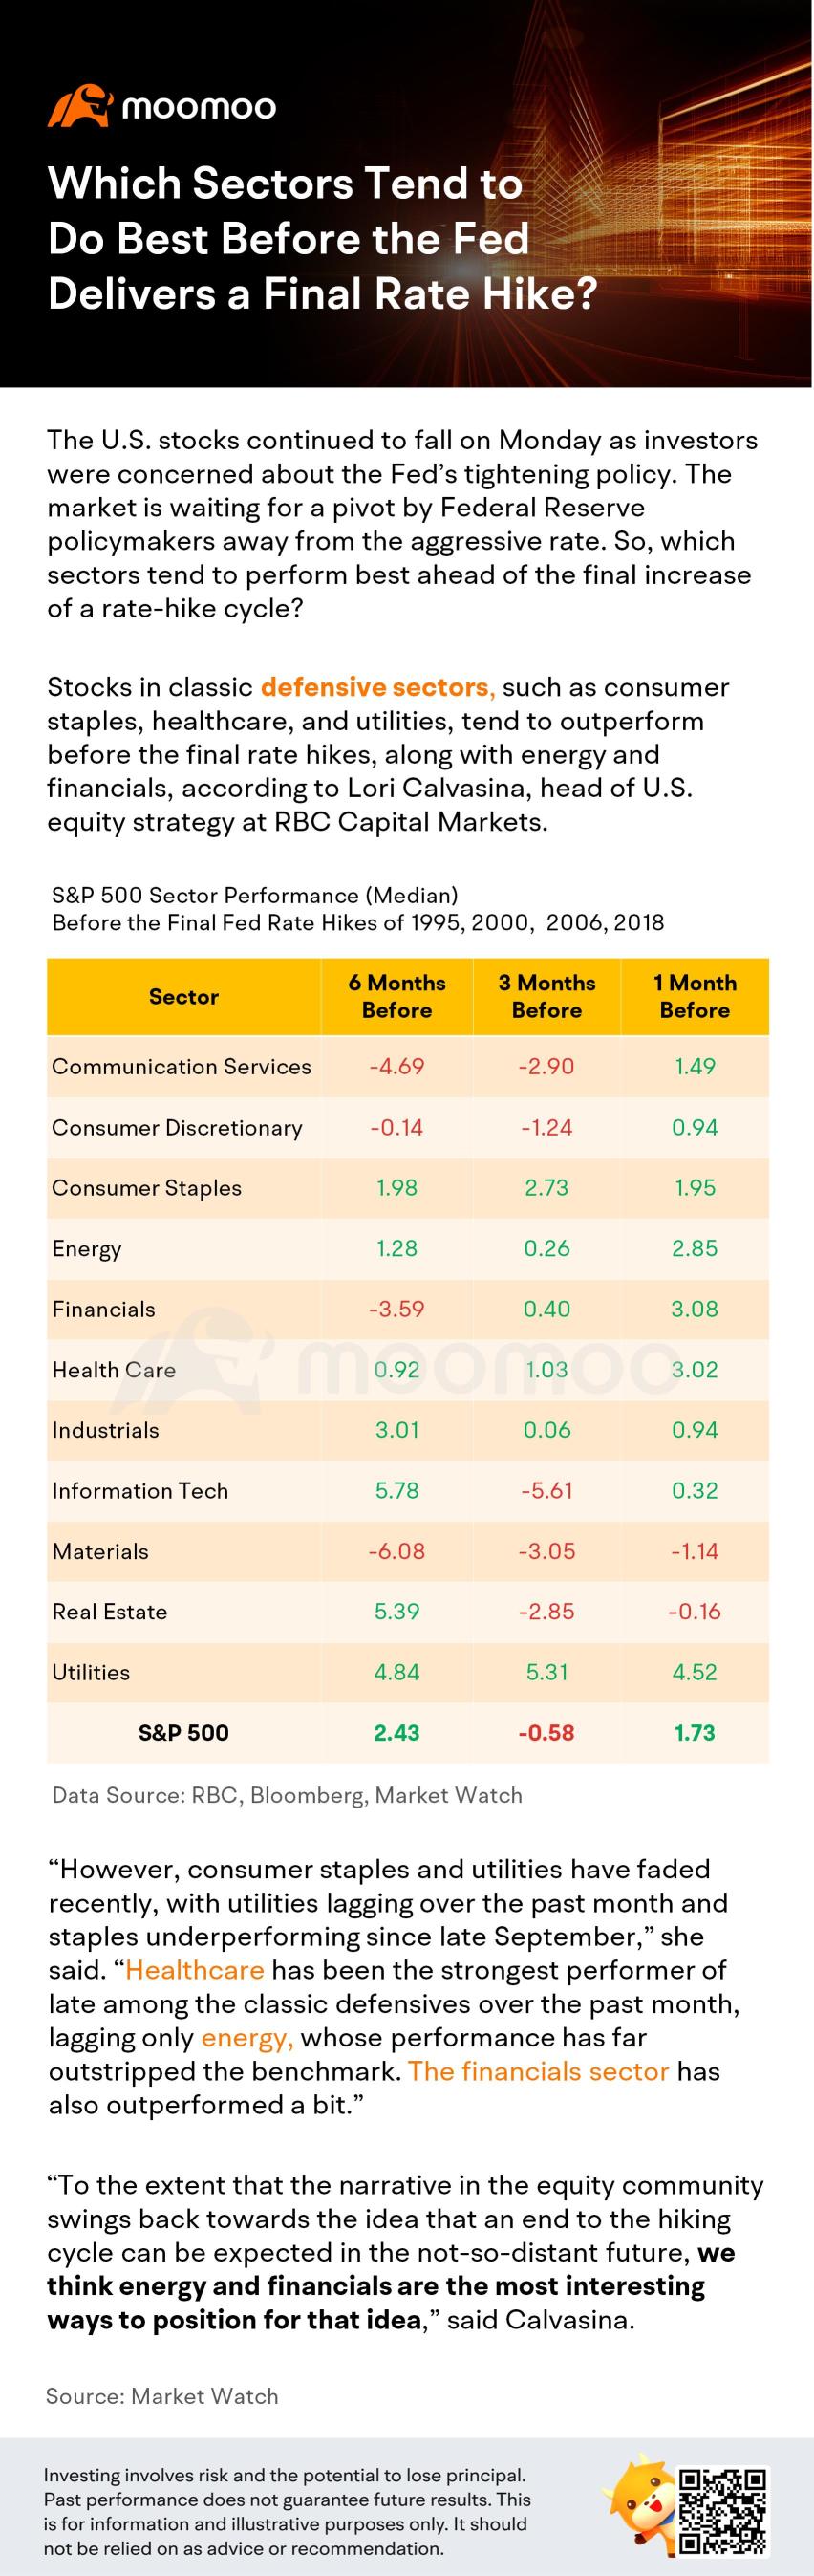 Which Sectors Tend to Do Best Before the Fed Delivers a Final Rate Hike?